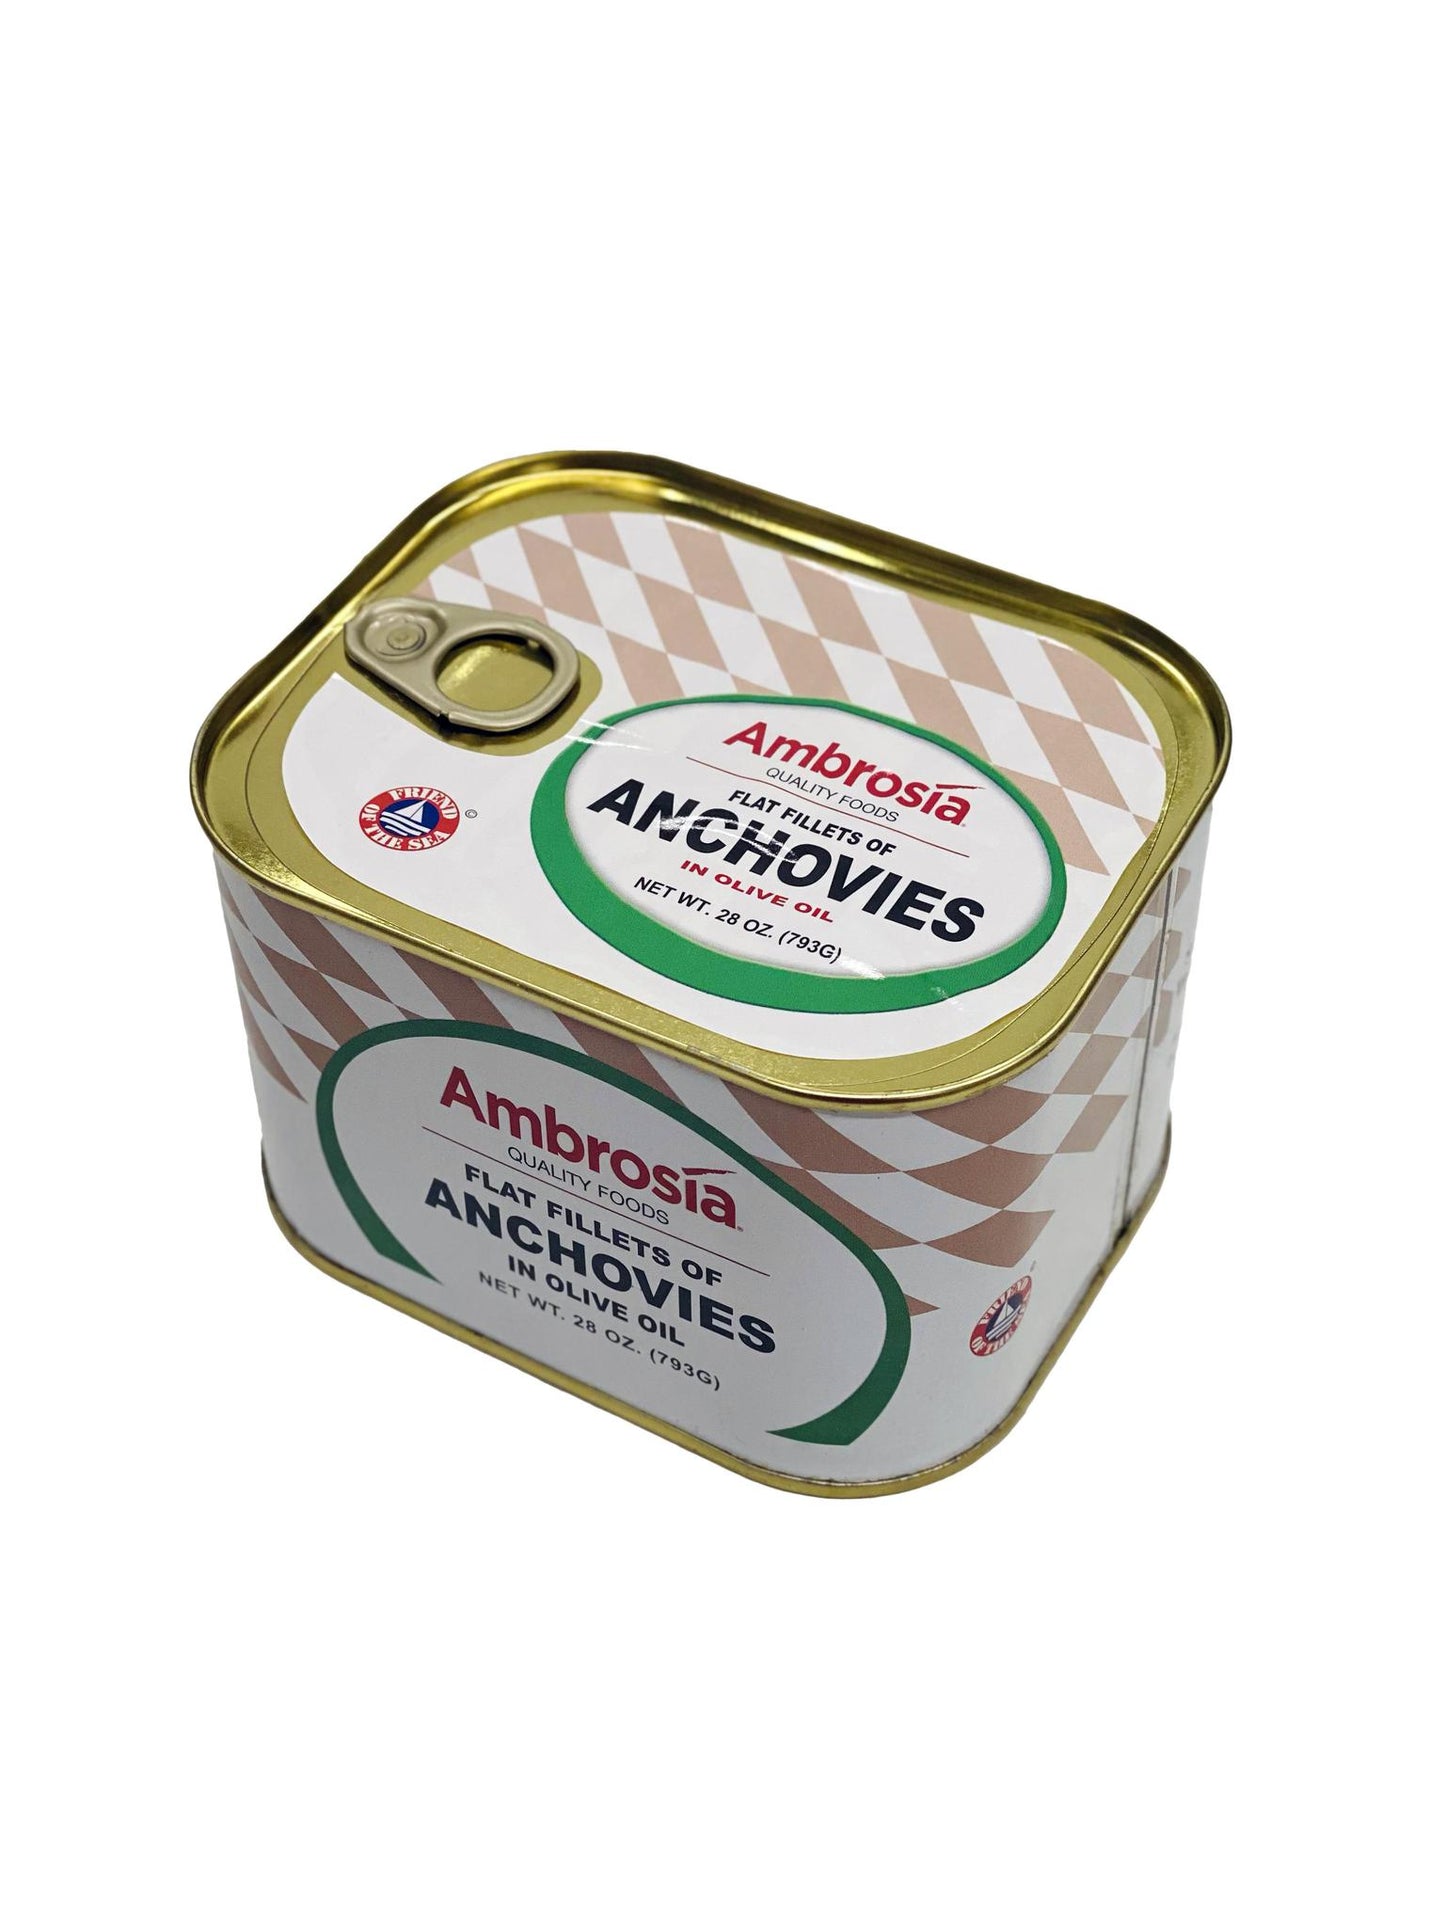 Ambrosia Flat Fillet of Anchovies in Olive Oil, 28 oz